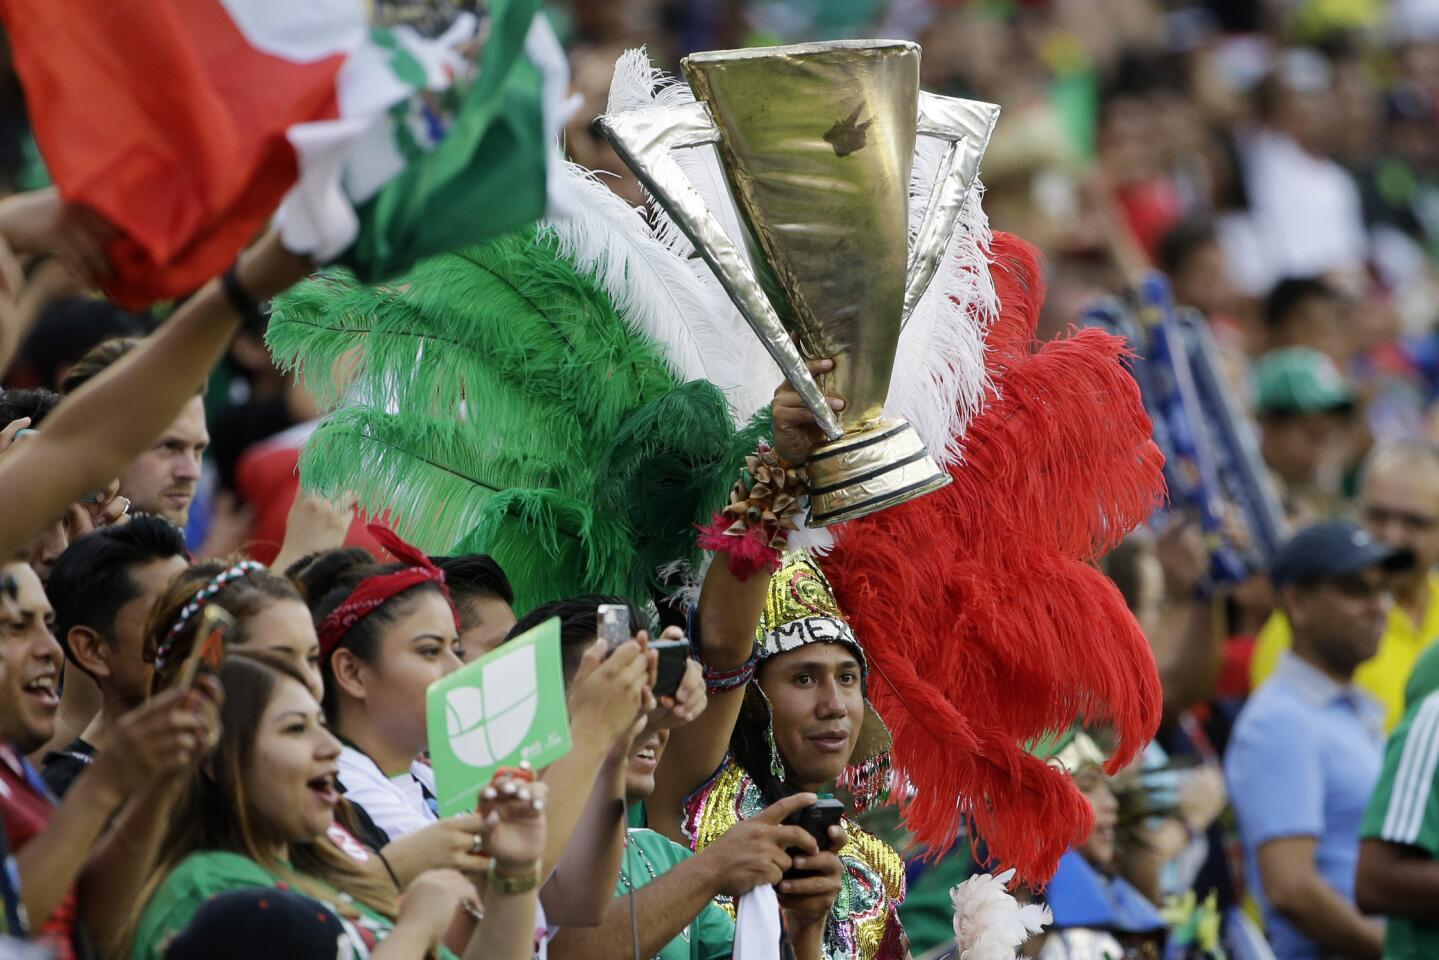 Fans cheer before the CONCACAF Gold Cup championship soccer match between Mexico and Jamaica, Sunday, July 26, 2015, in Philadelphia. (AP Photo/Matt Rourke)